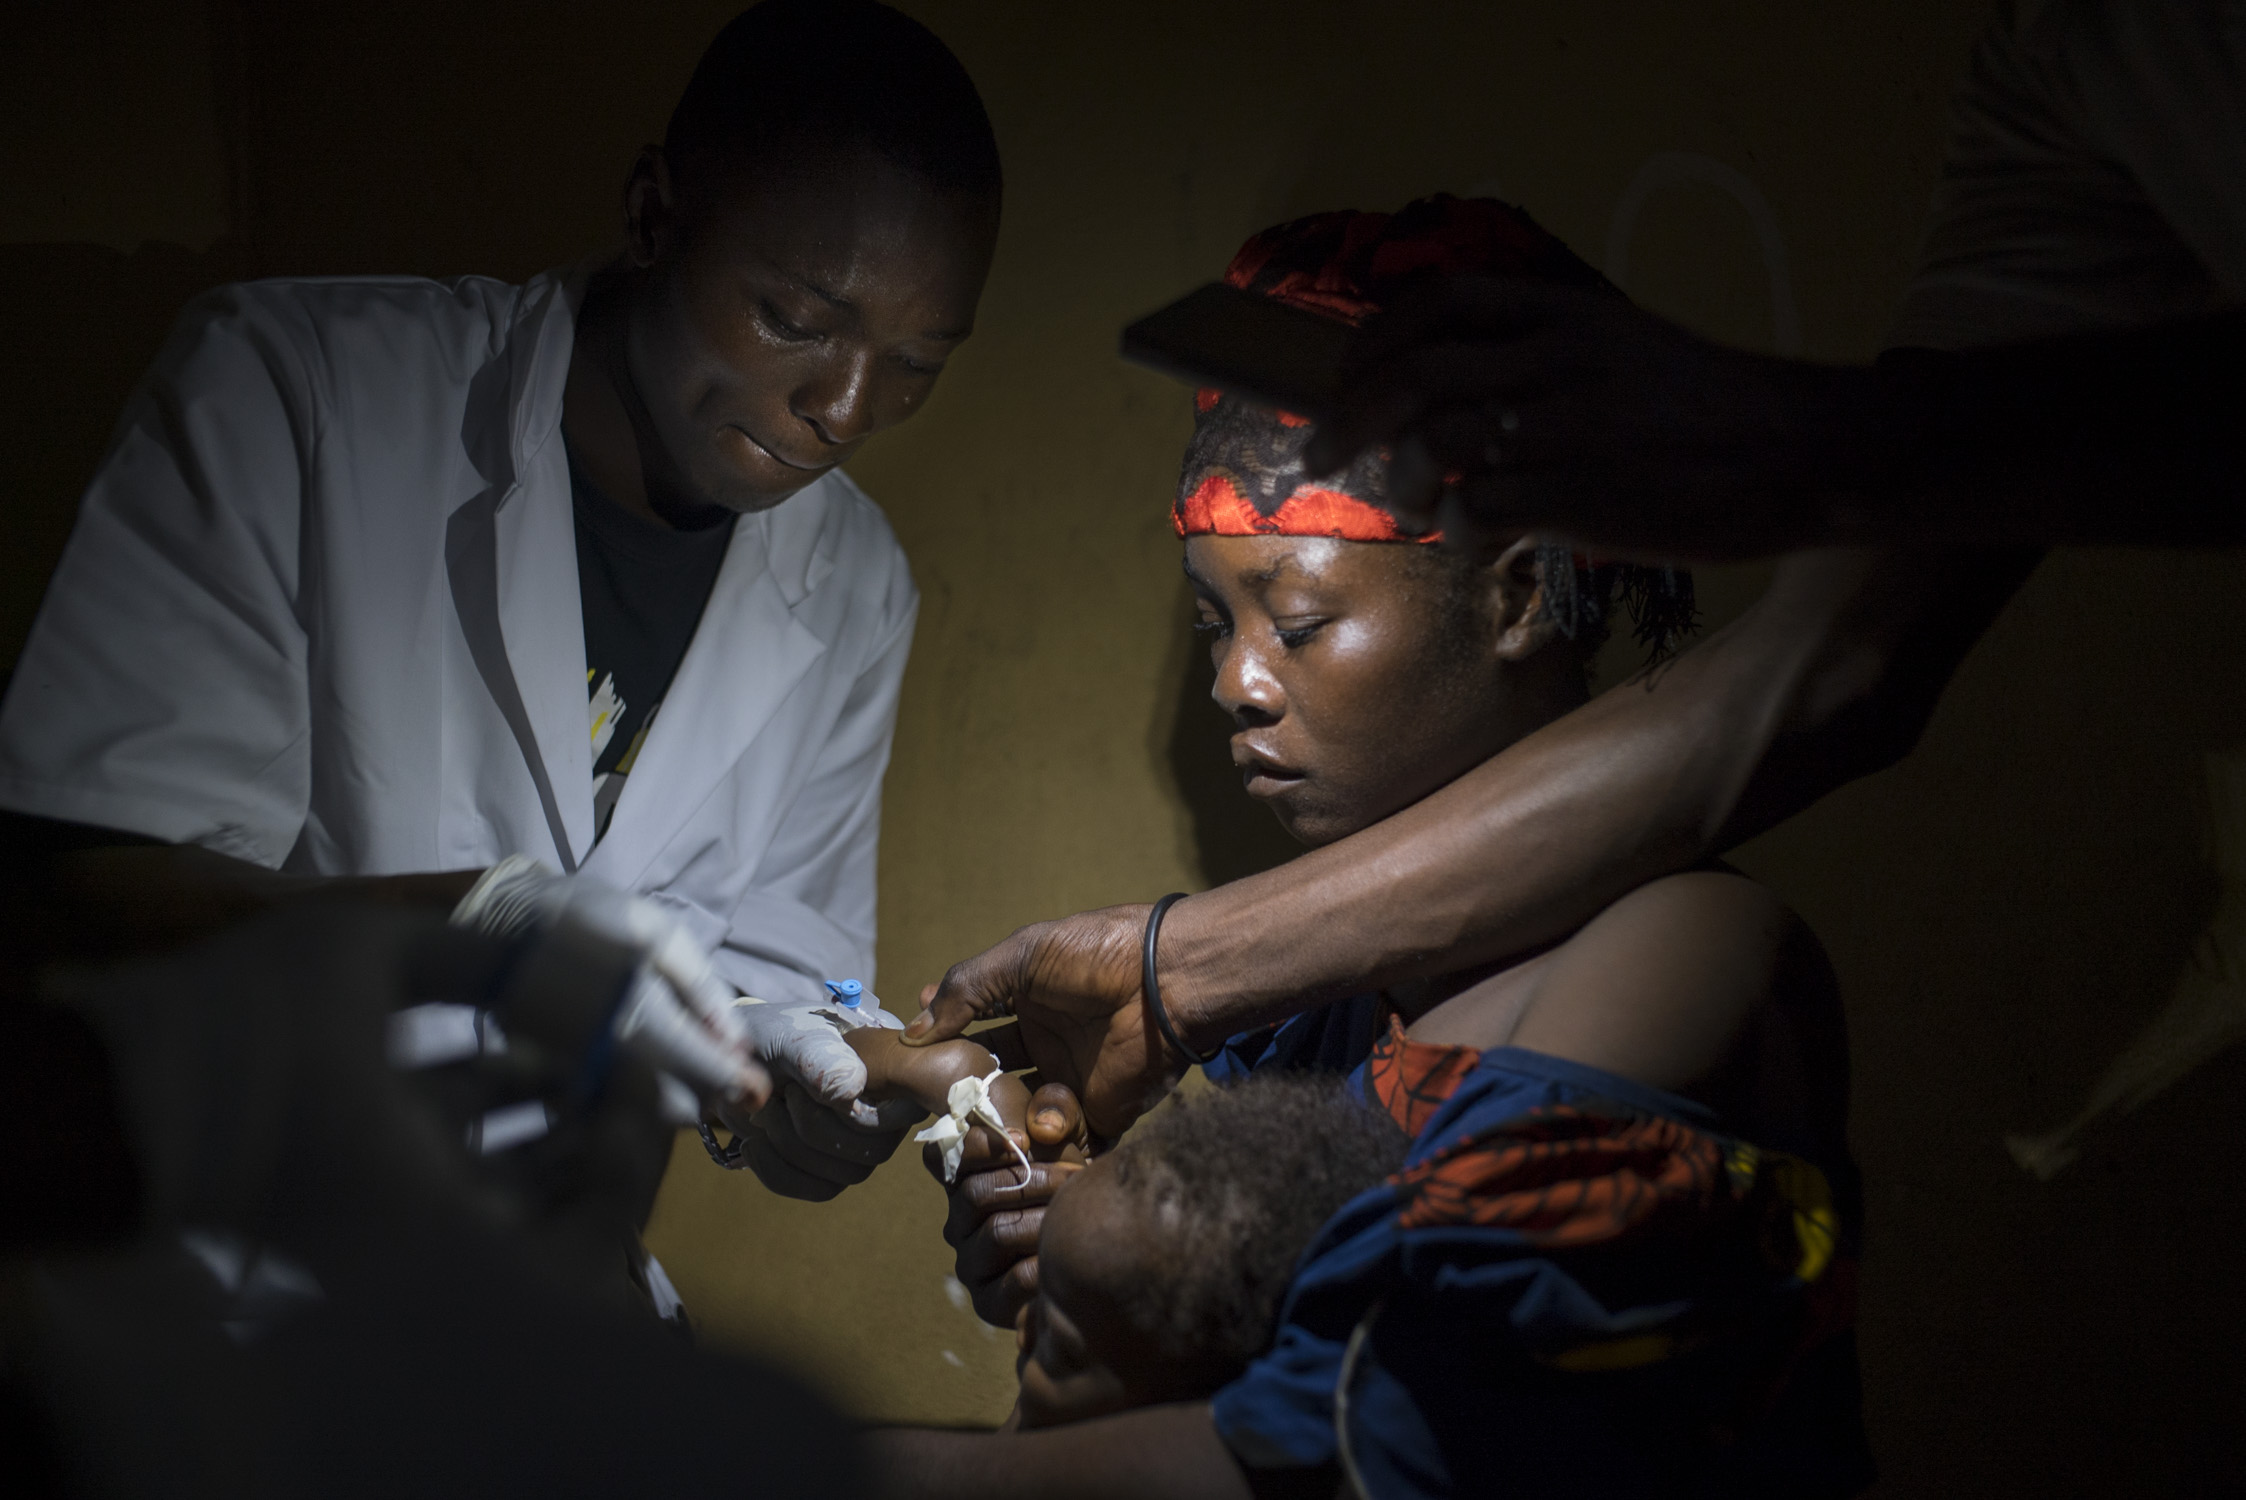  Late in the night, Nurse Dieumerci Ngame administers a blood transfusion to five-month old Adji Yanzambe, who receives treatment for anemia and malaria in the MSF wing of the hospital in Monga, a town in a remote northern part of the Democratic Repu